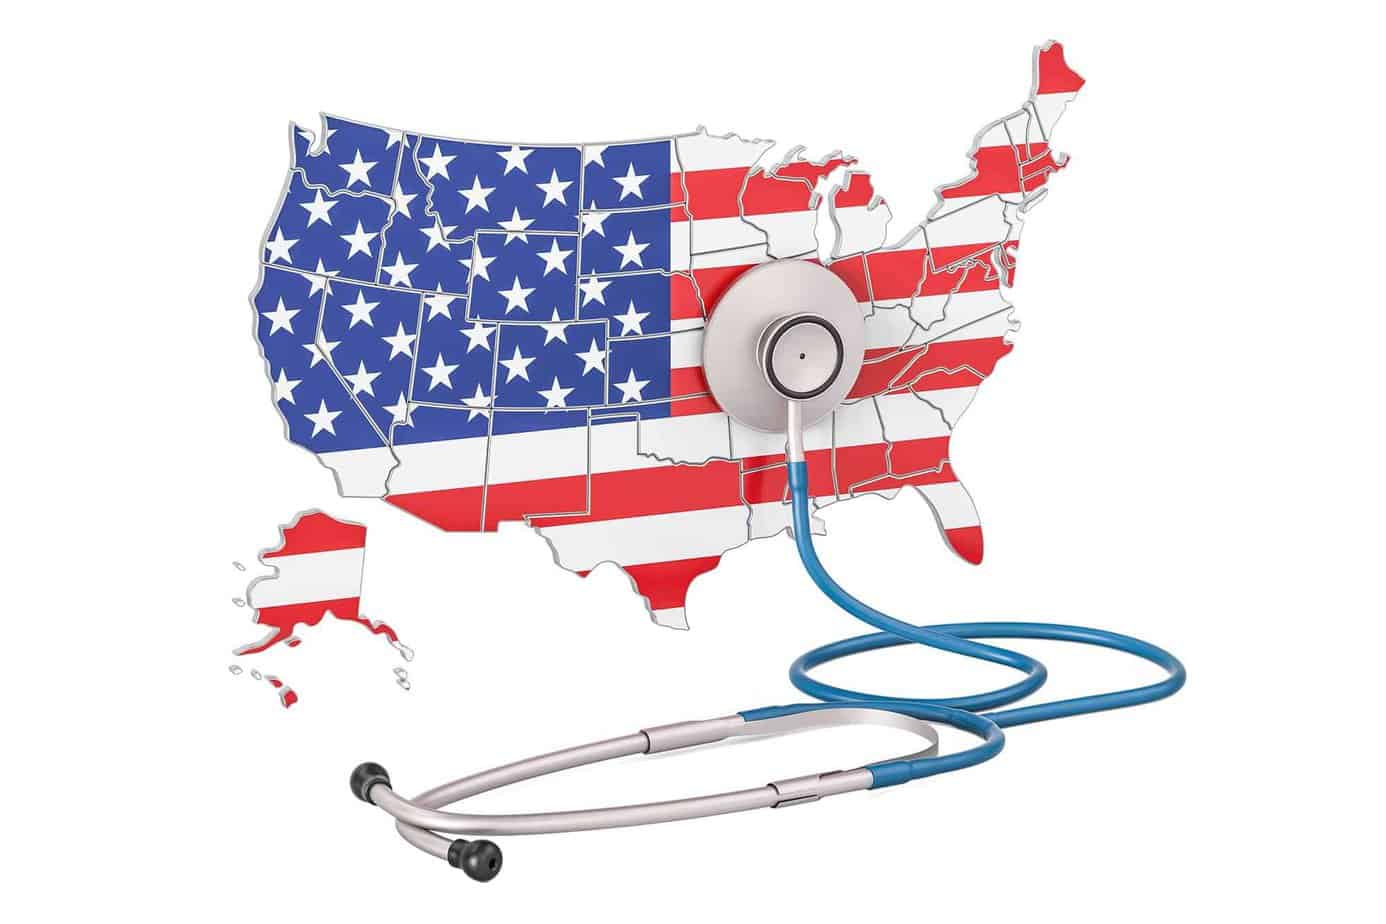 American flag over map of United States with doctor stethoscope on map